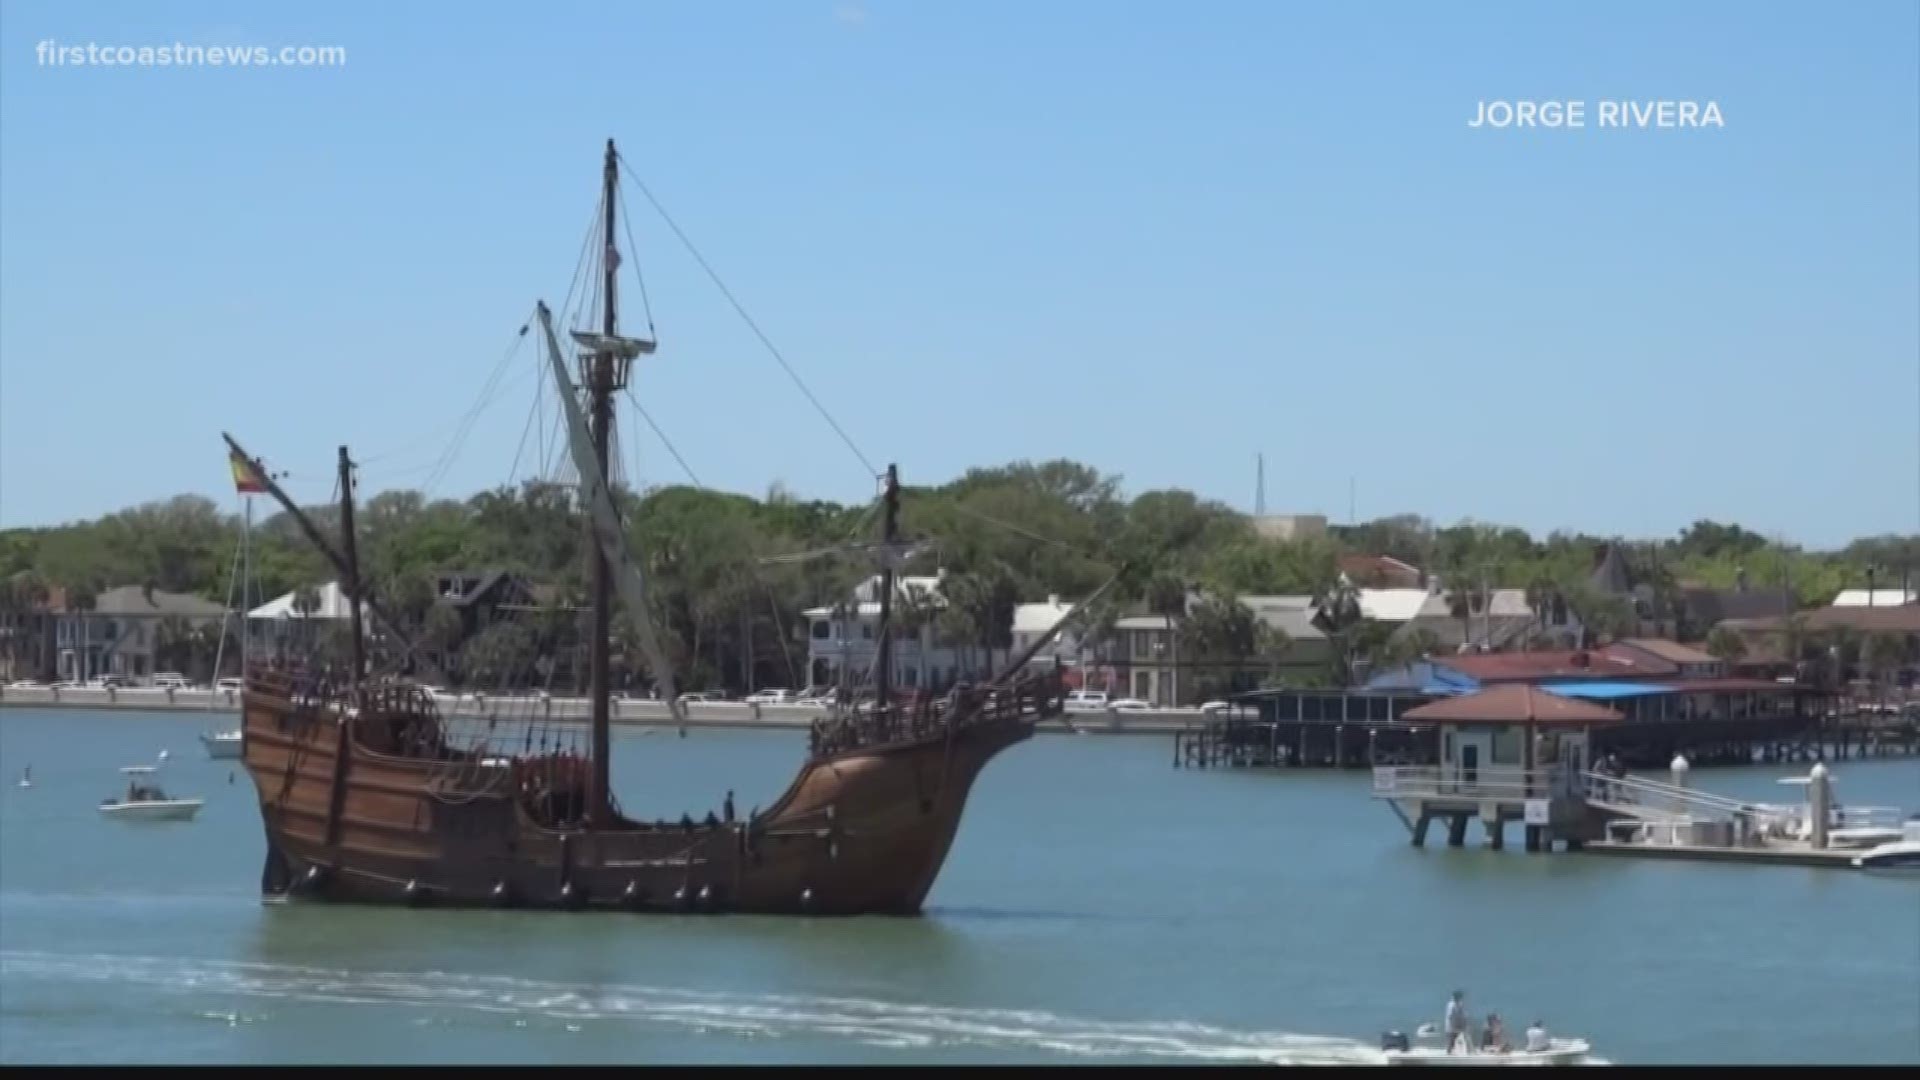 On Nov. 23, a replica of the Santa Maria tall ship will sail into St. Augustine for the weekend.